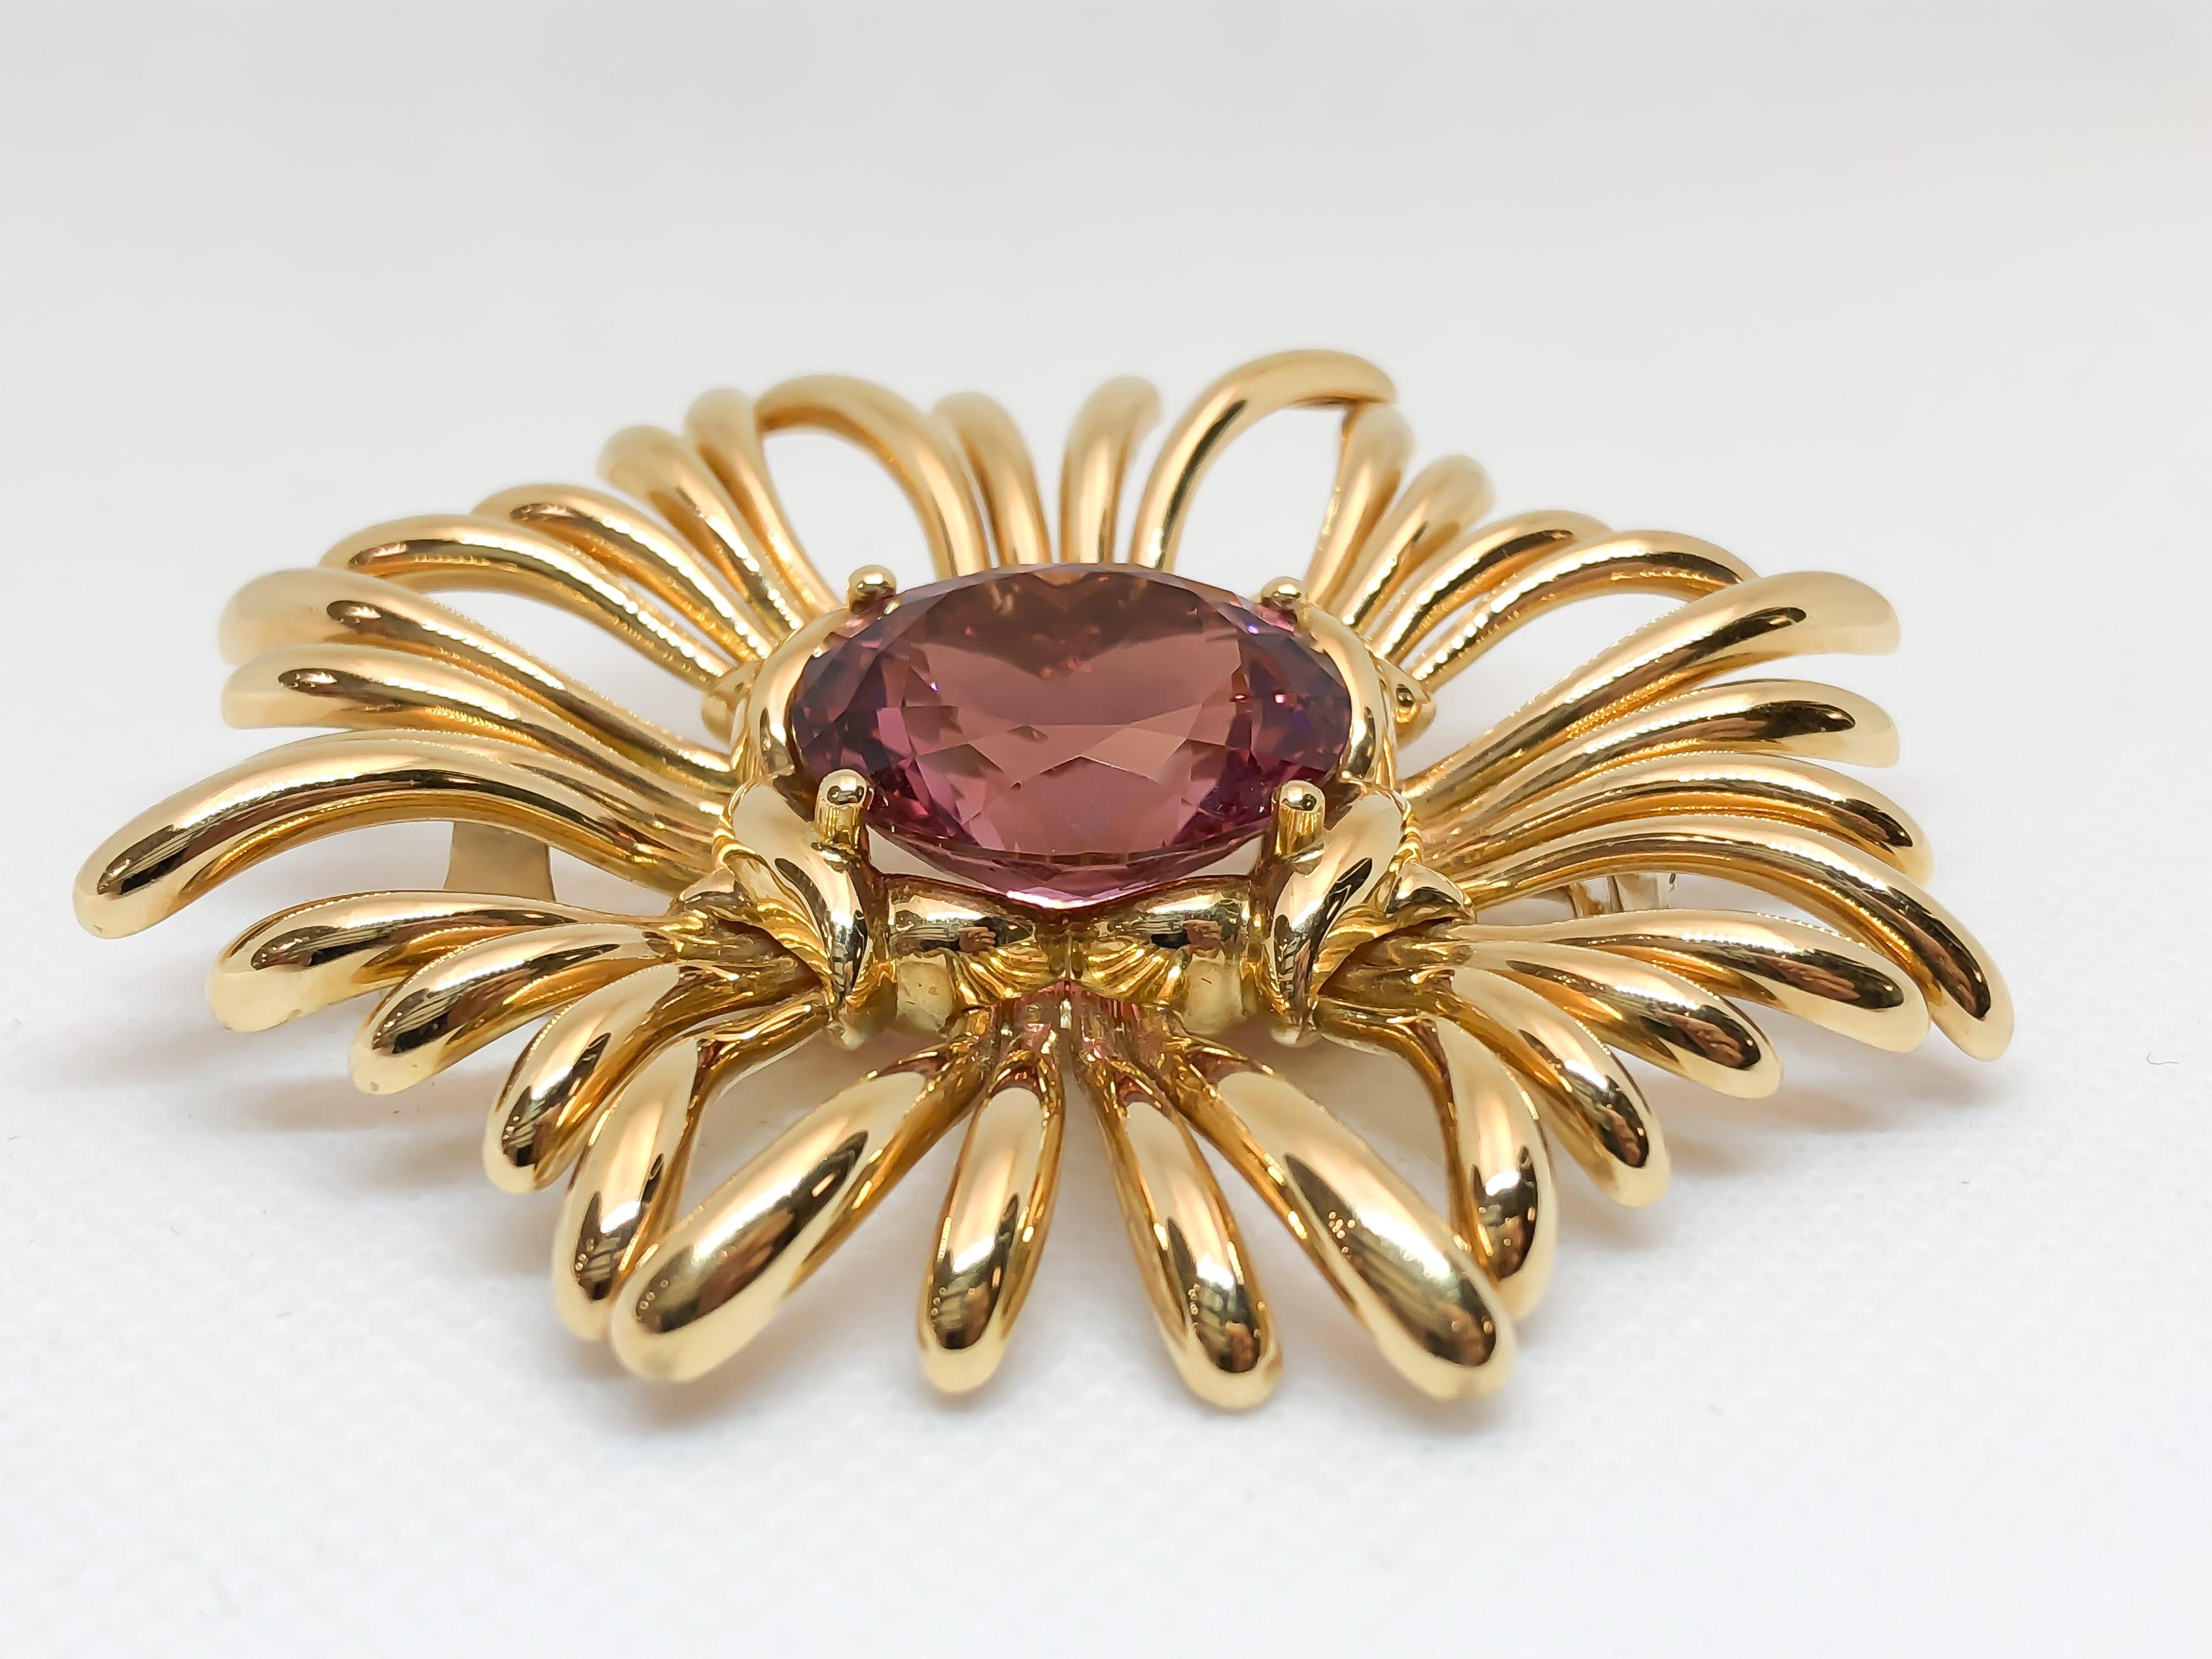 This large pink Tourmaline brooch is a true collectors piece. Designed by Verdura in 18 karat yellow gold. Medium rich raspberry pink Tourmaline set in the center of an organic polished flower brooch mounting. This piece is unused, never worn!